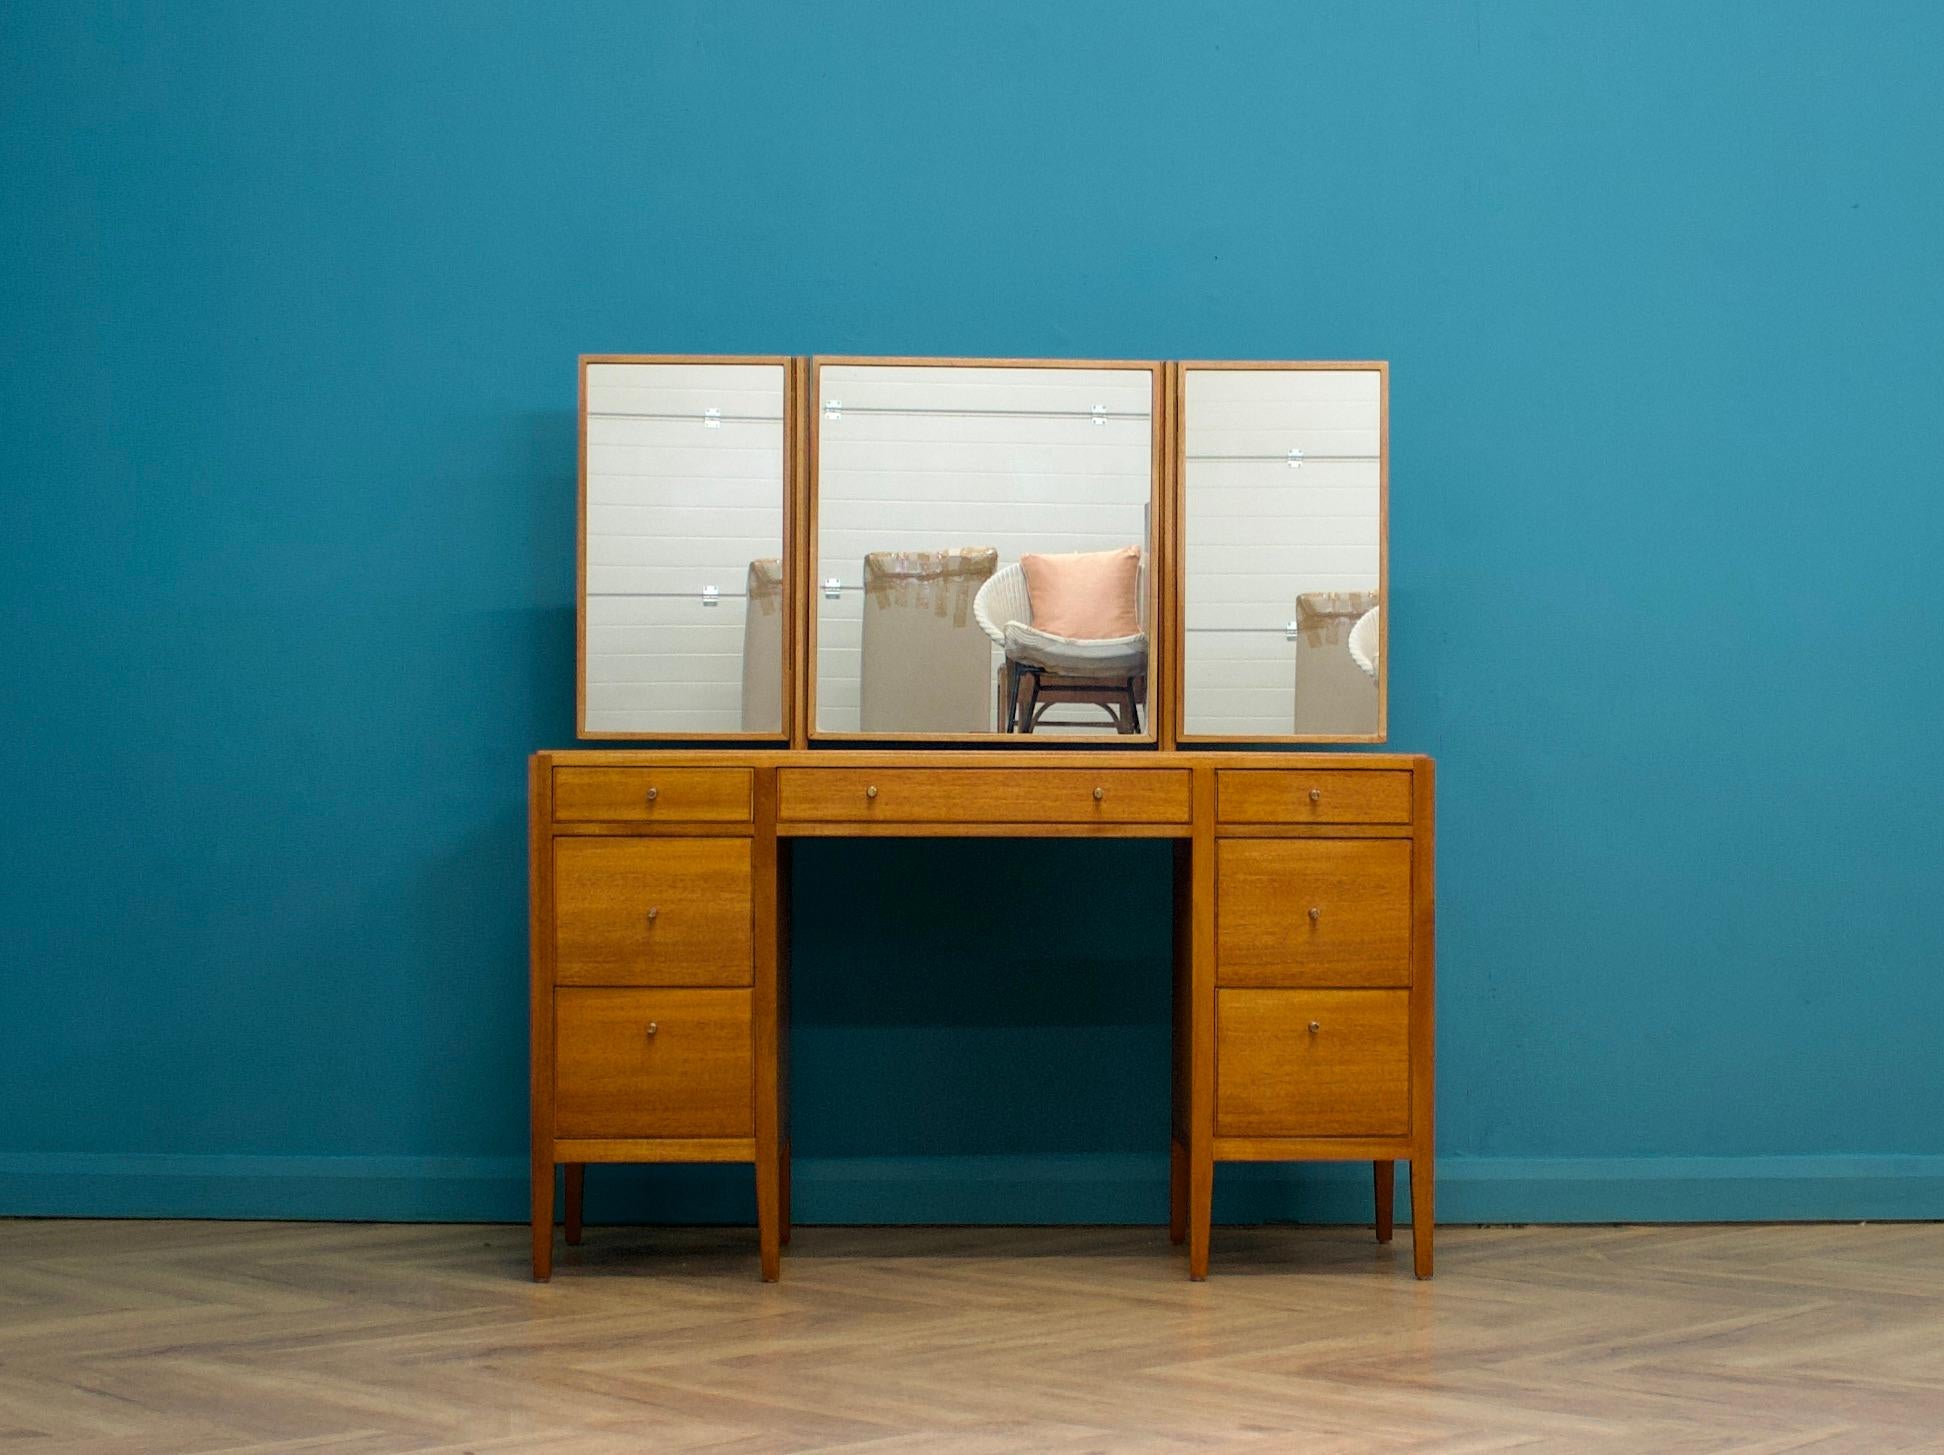 A mid century teak & mahogany dressing table from Loughborough, circa 1960's - these pieces from Loughborough were usually retailed through Heals department store
Complete with a triptych mirror - the middle tilts, the two side mirror's swivel
There